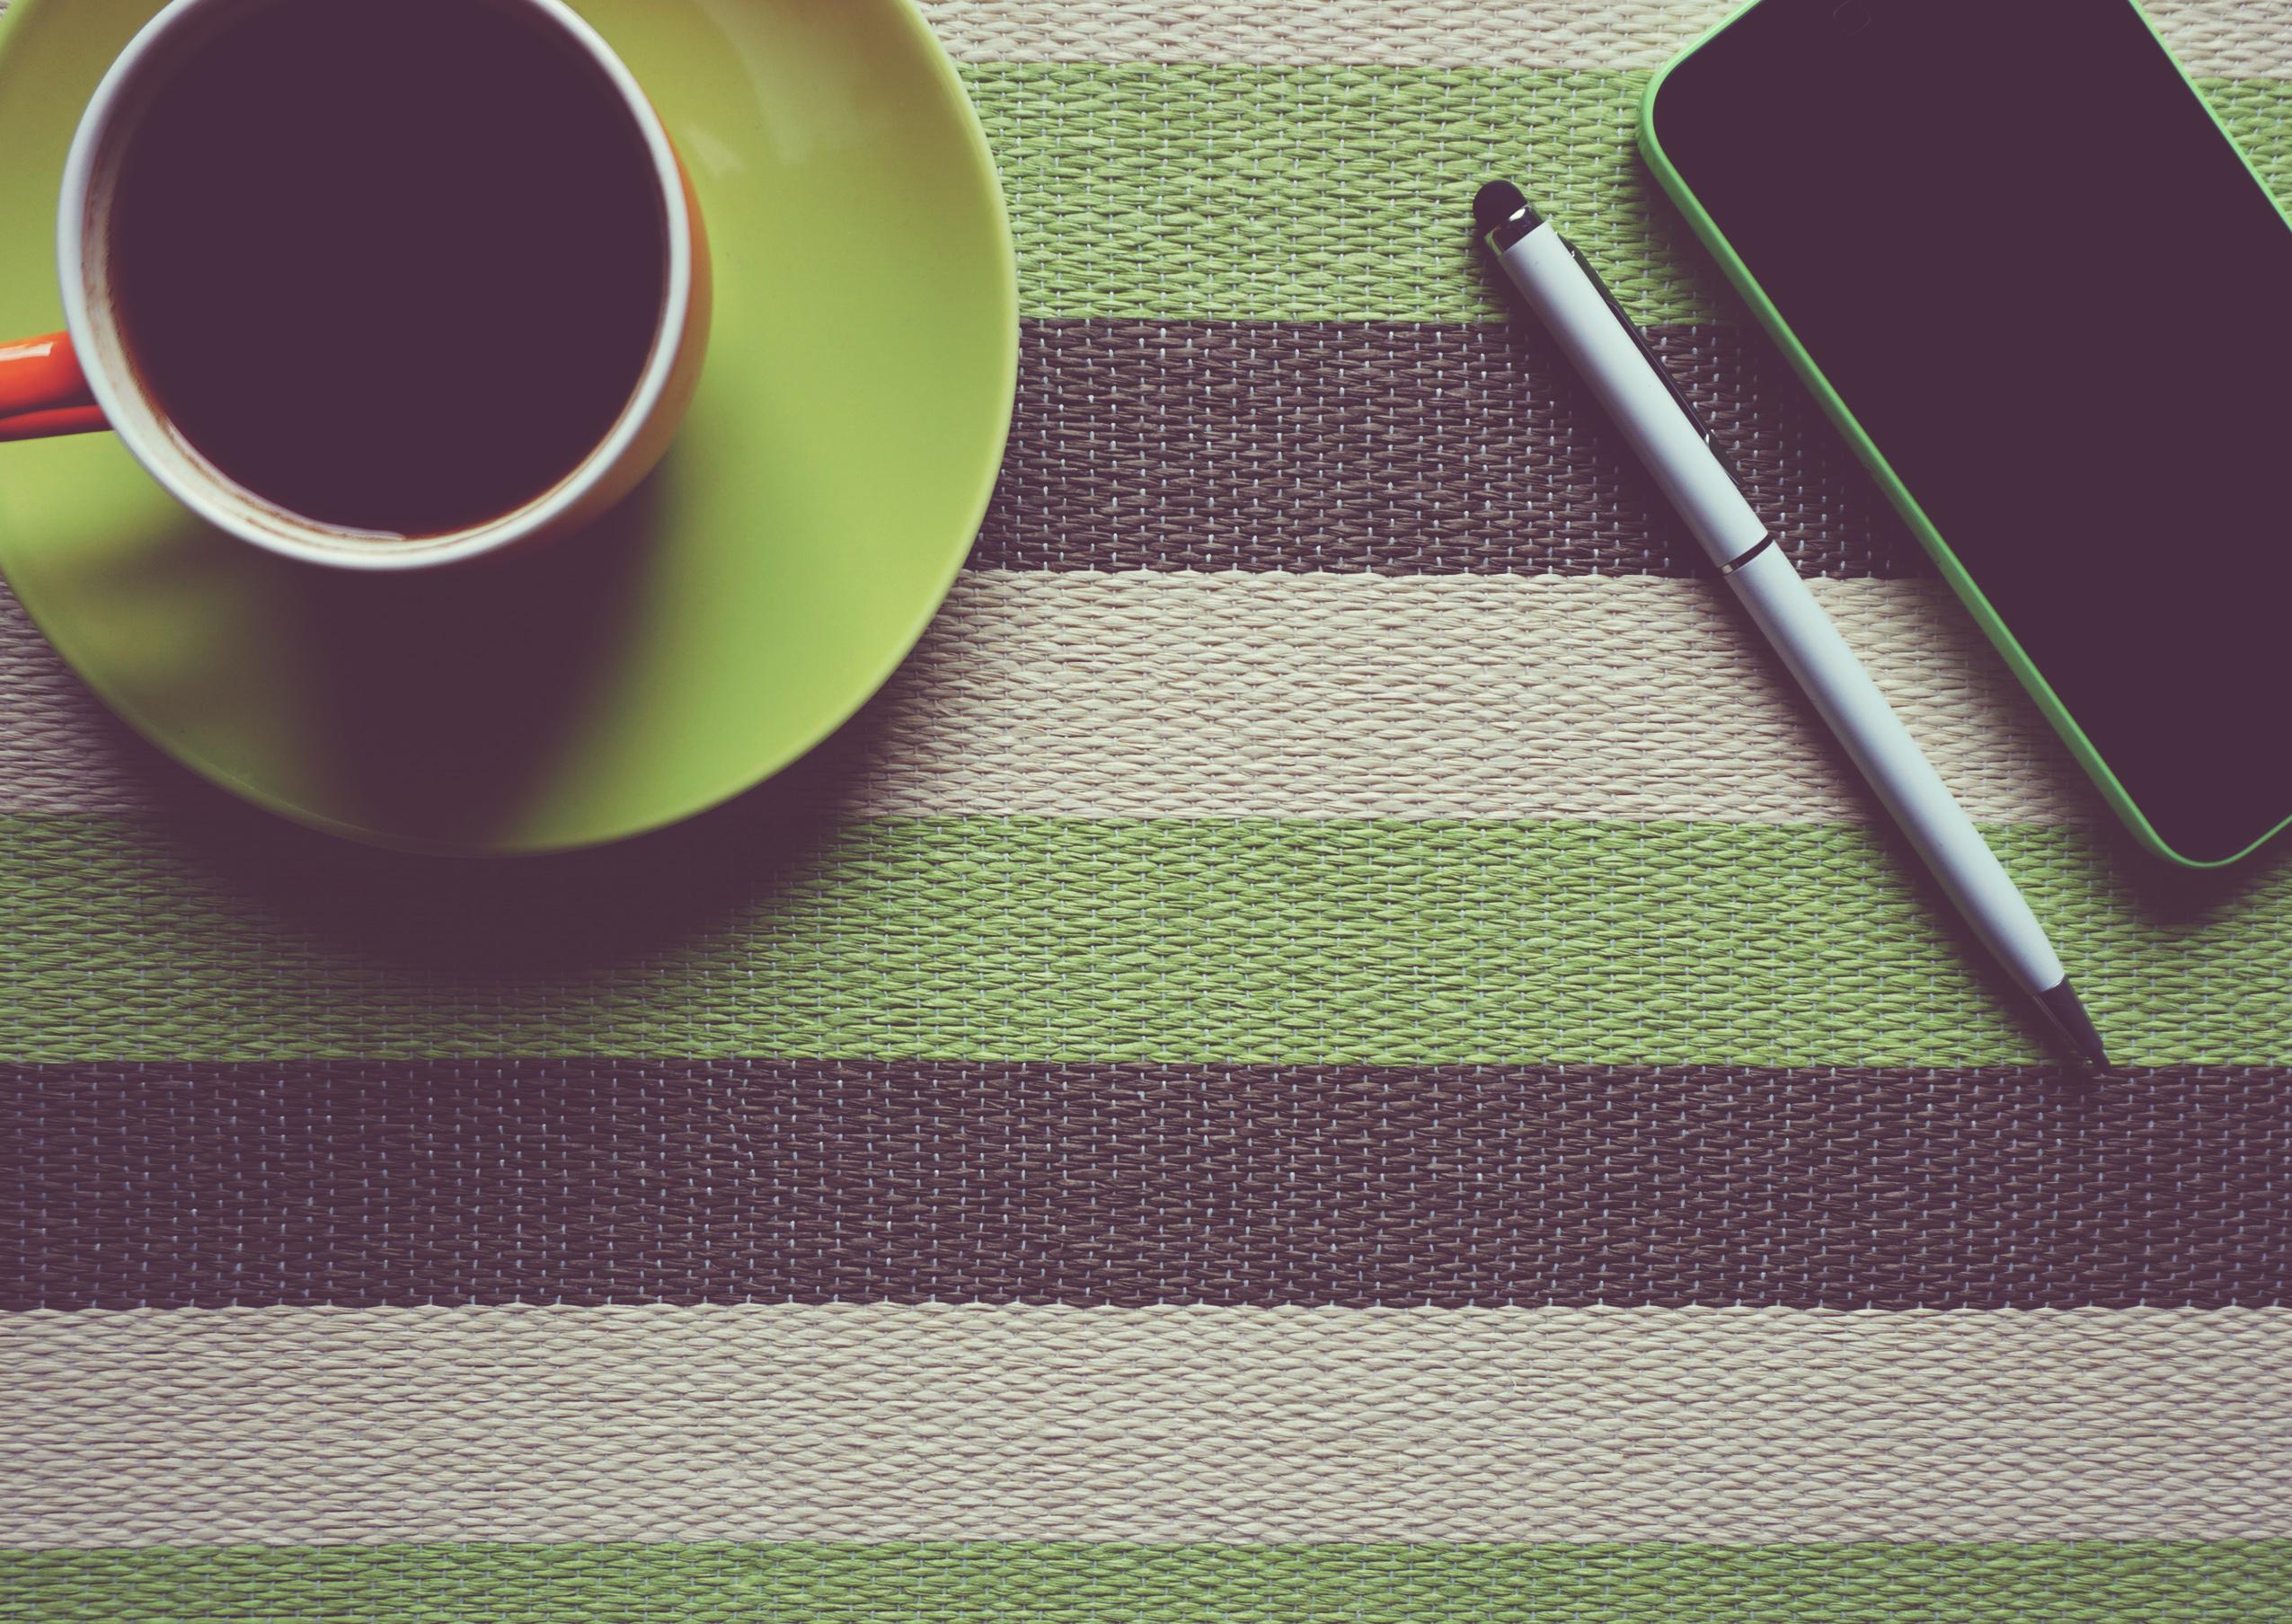 A cup of coffee on a table next to a cell phone and a pen.